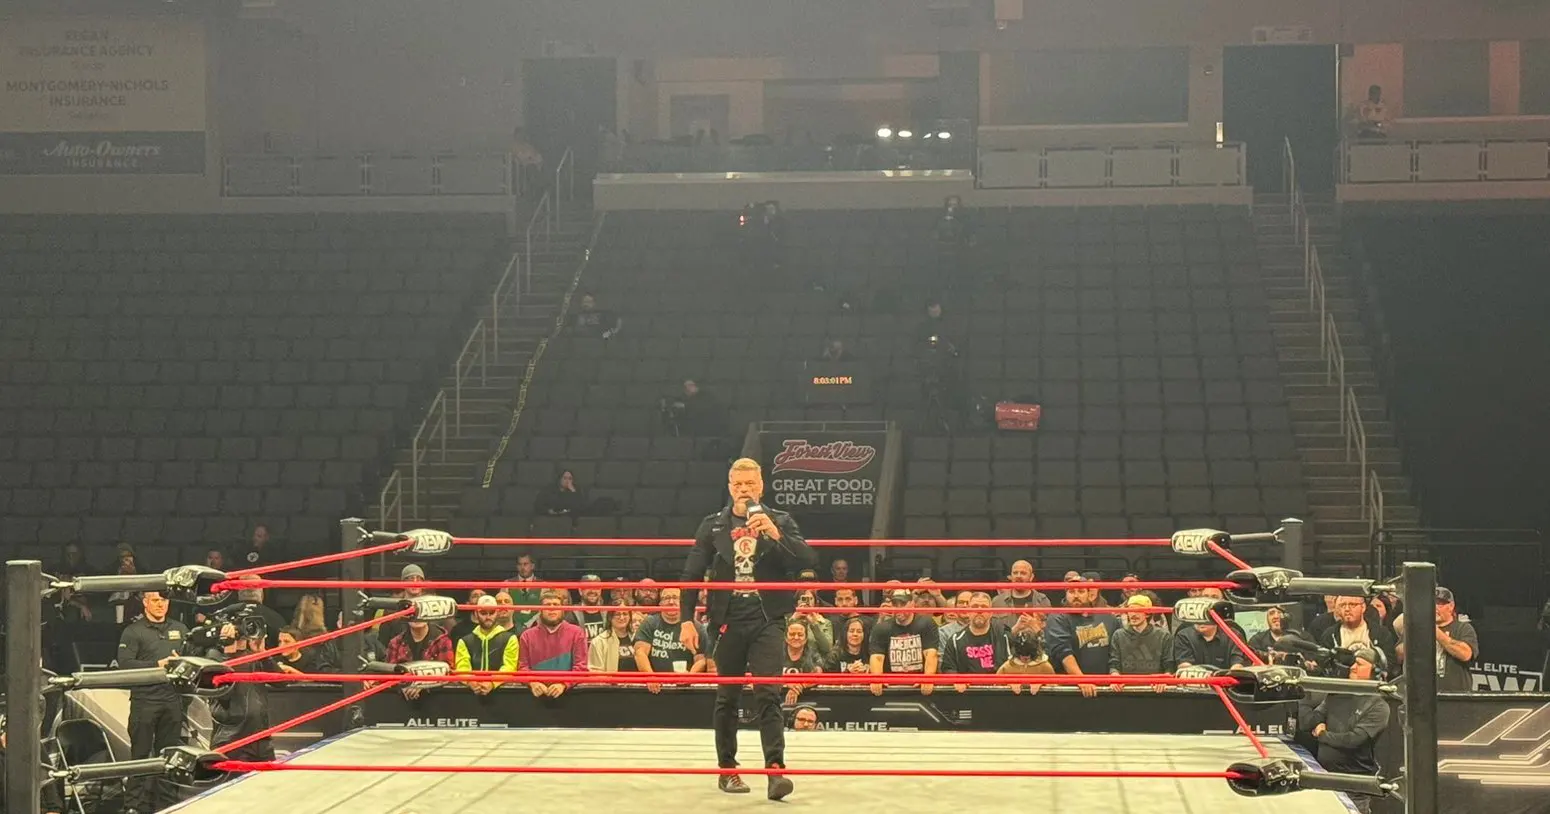 Fan Photos Show Lots Of Empty Seats At AEW Collision